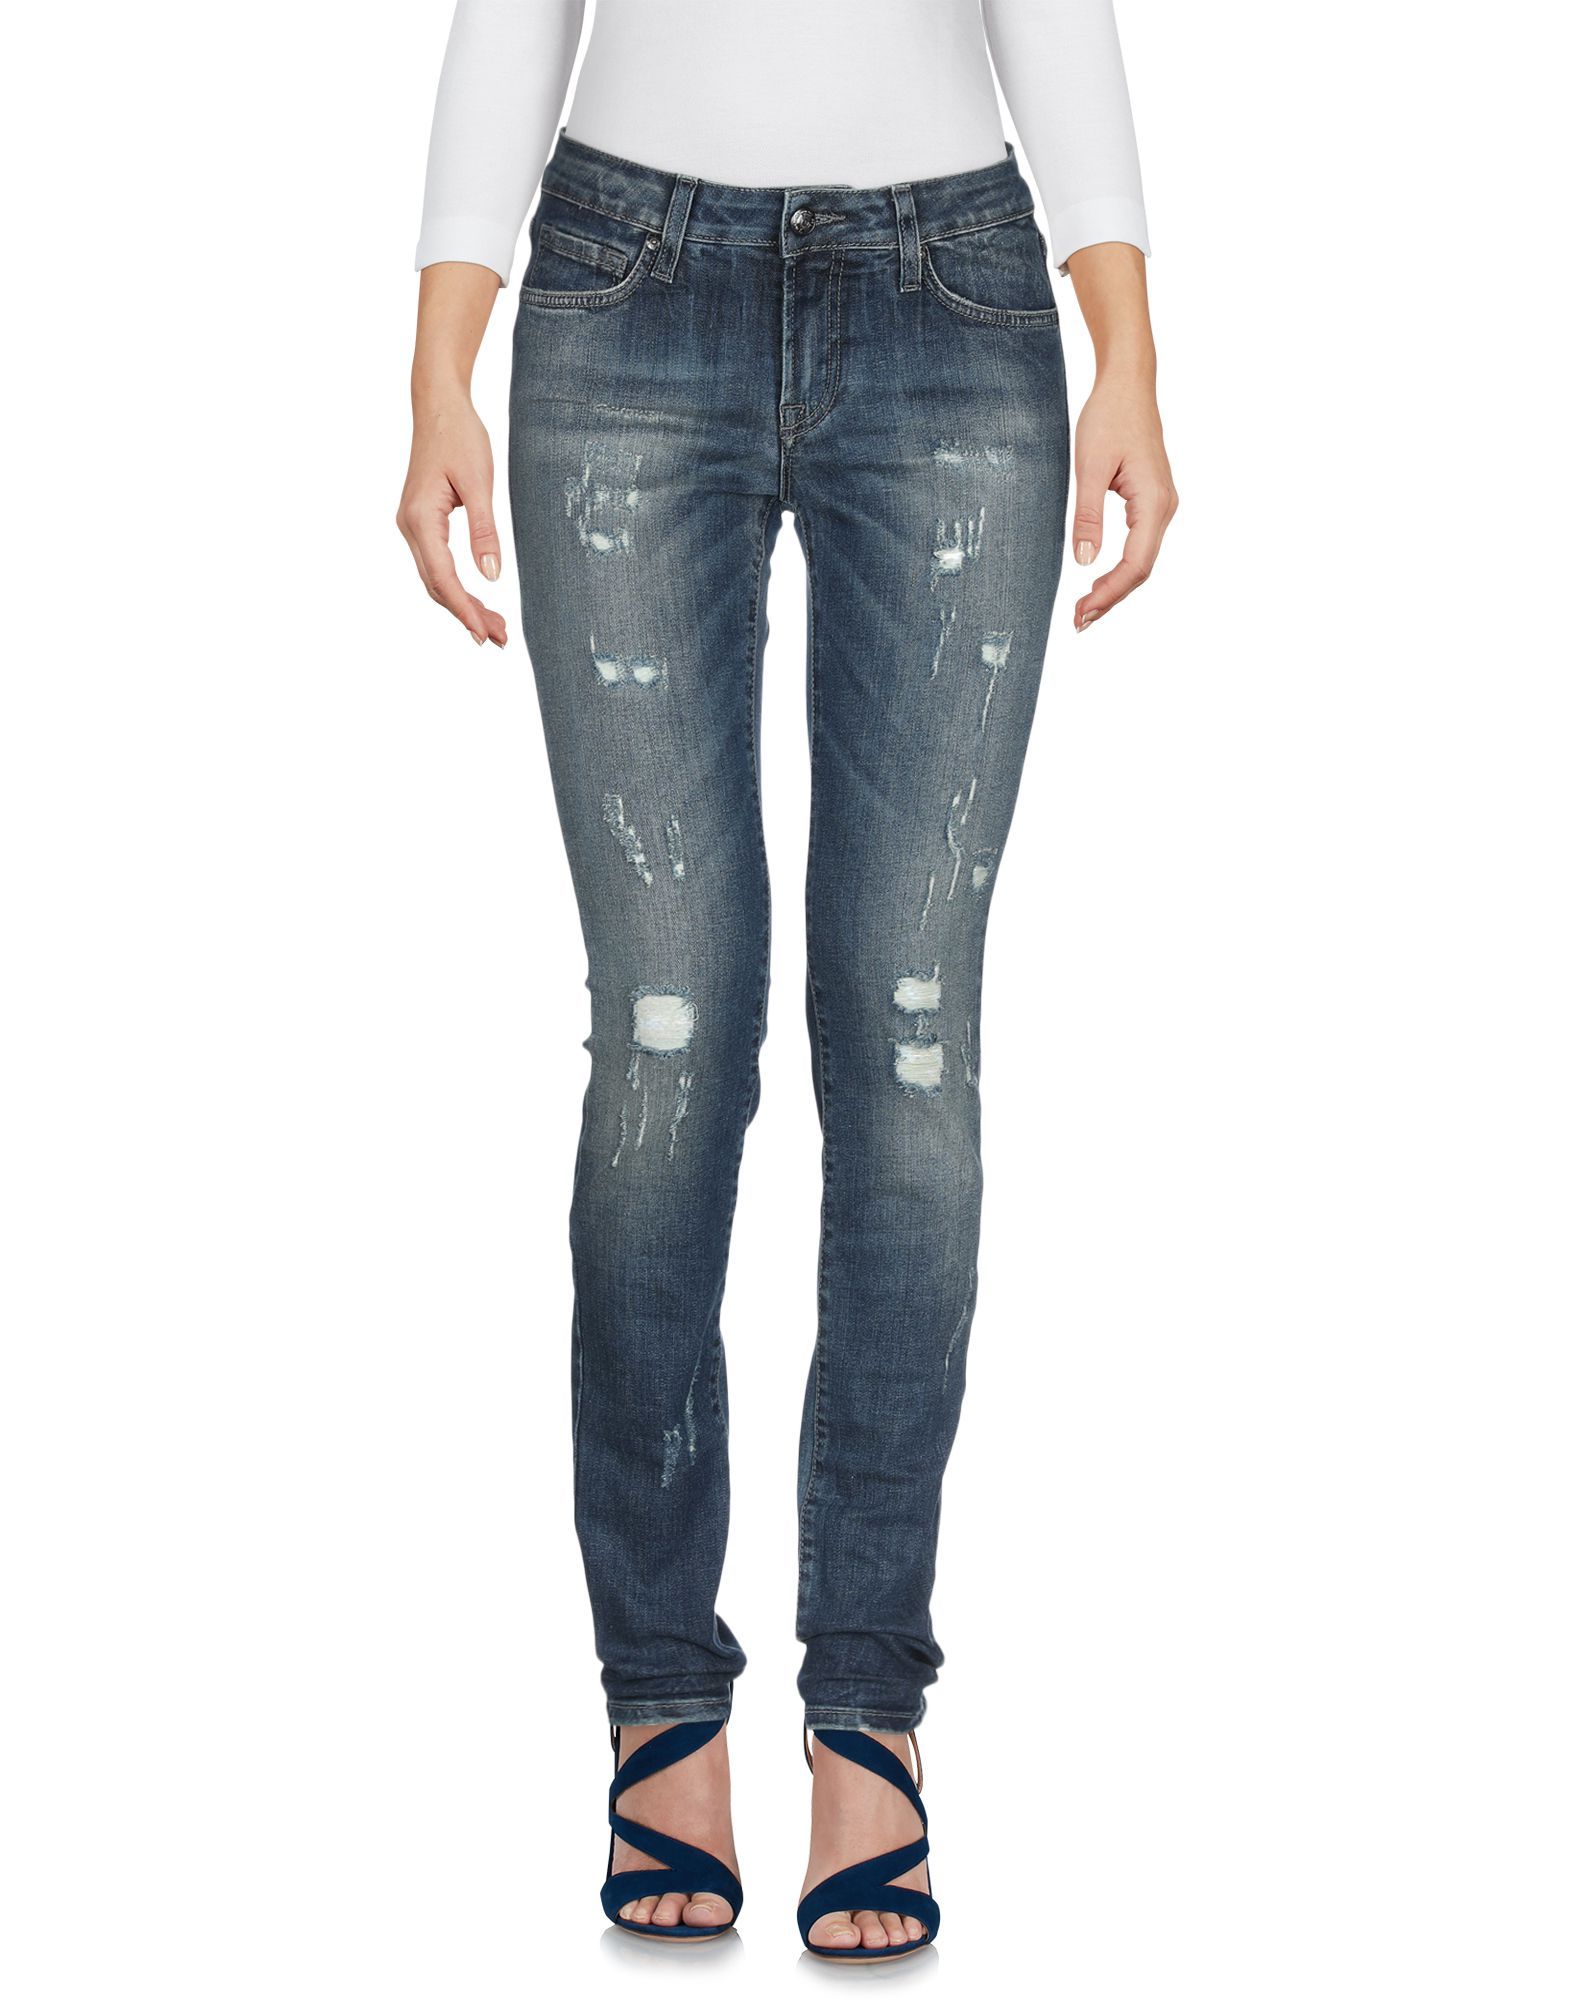 denim, worn effect, faded, rhinestones, logo, solid colour, medium wash, mid rise, front closure, button, zip, multipockets, contains non-textile parts of animal origin, stretch, slim fit